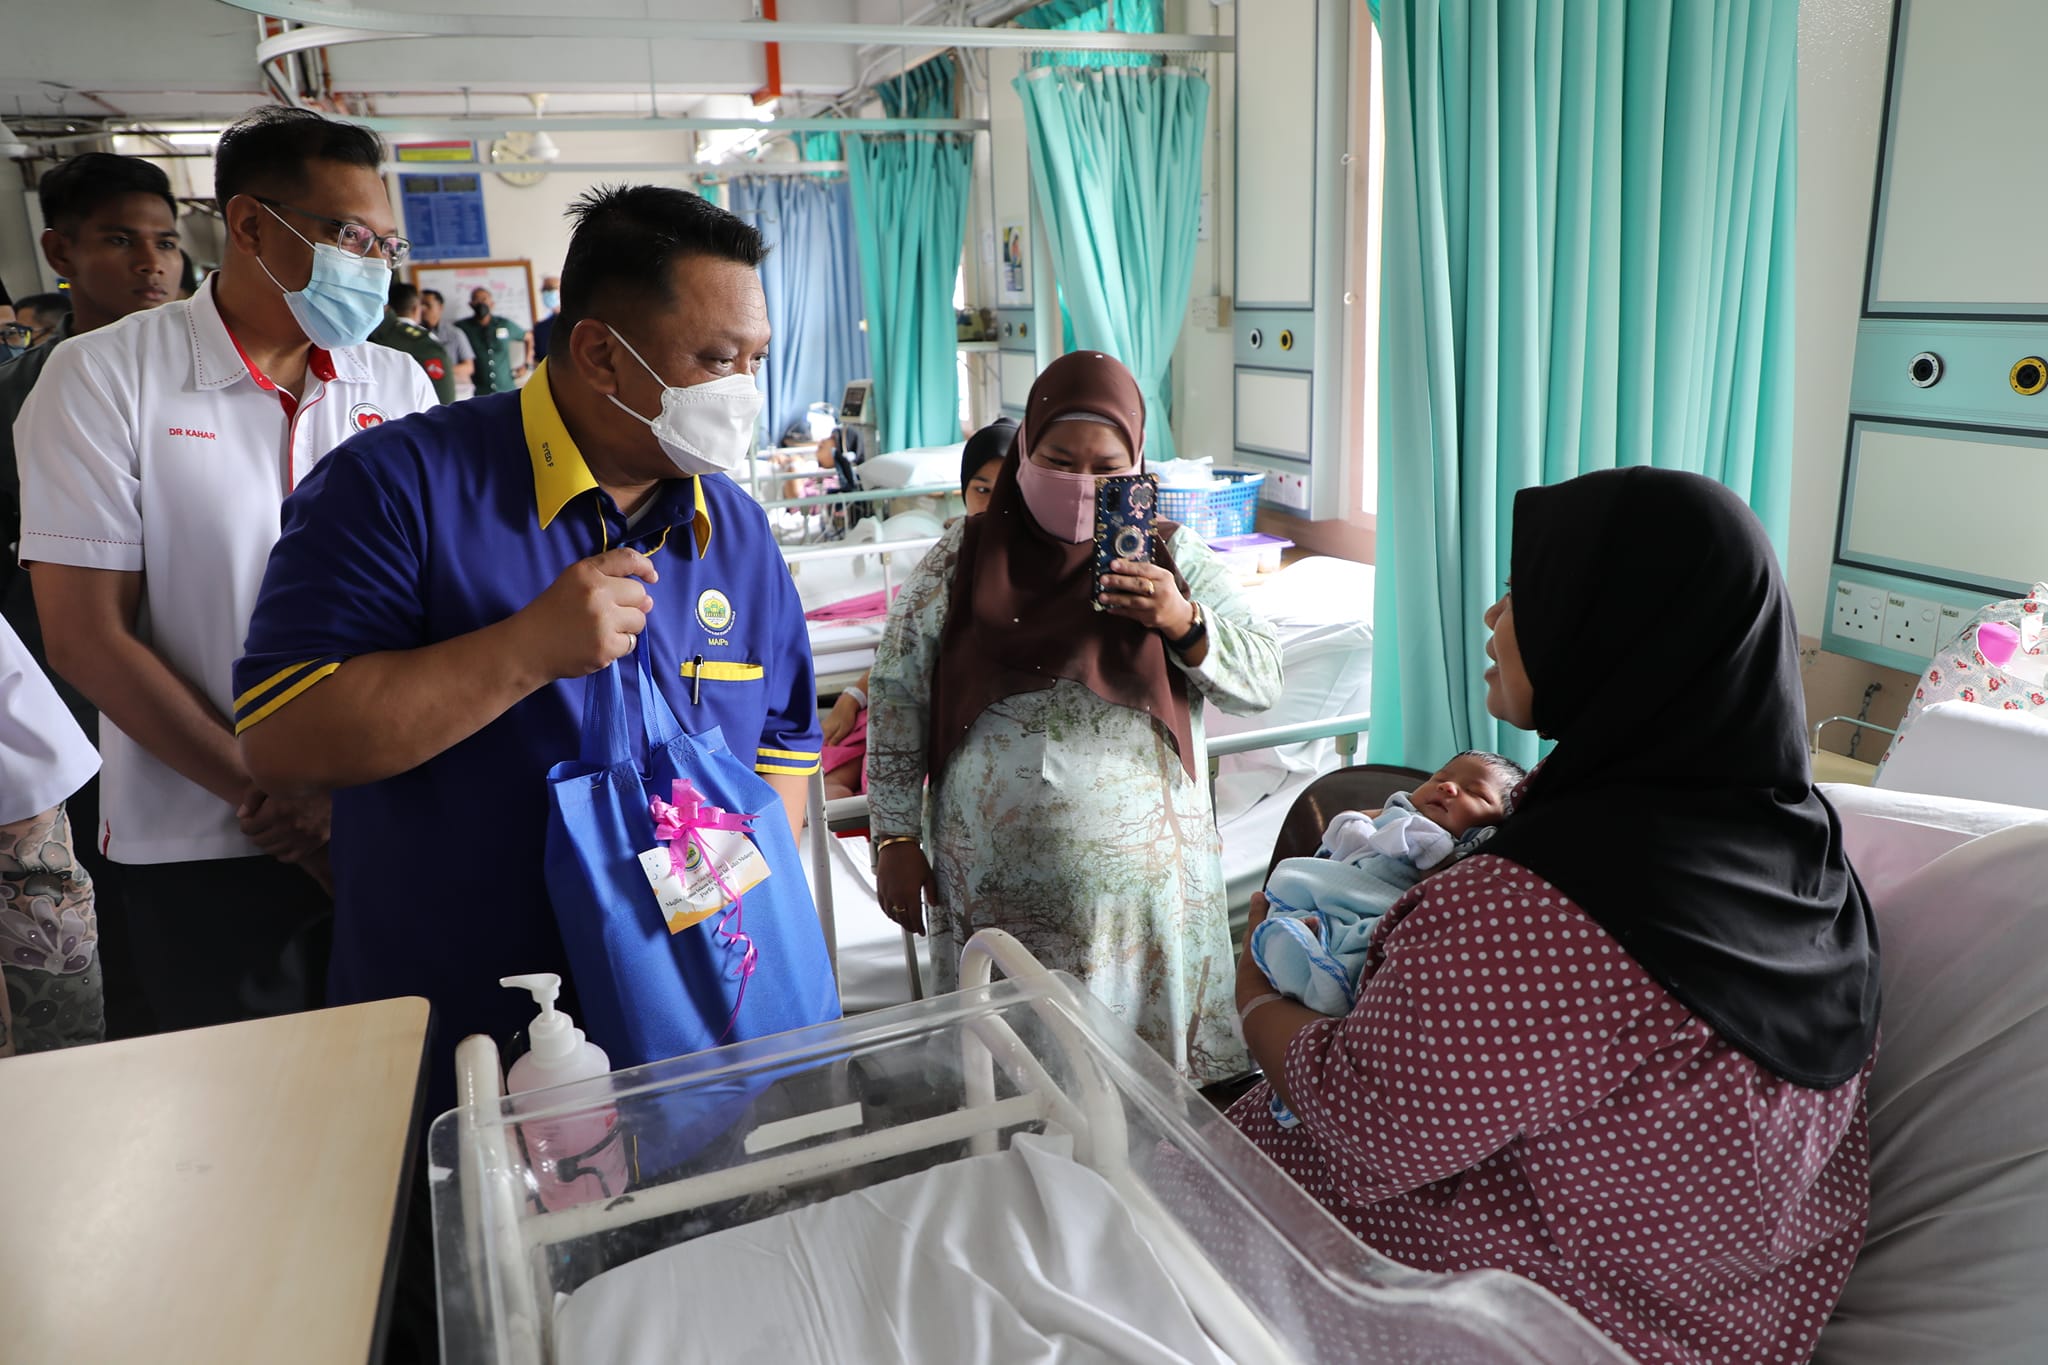 Perlis crown prince’s 2017 donation of vital machines benefited over 30,000 babies in Sabah